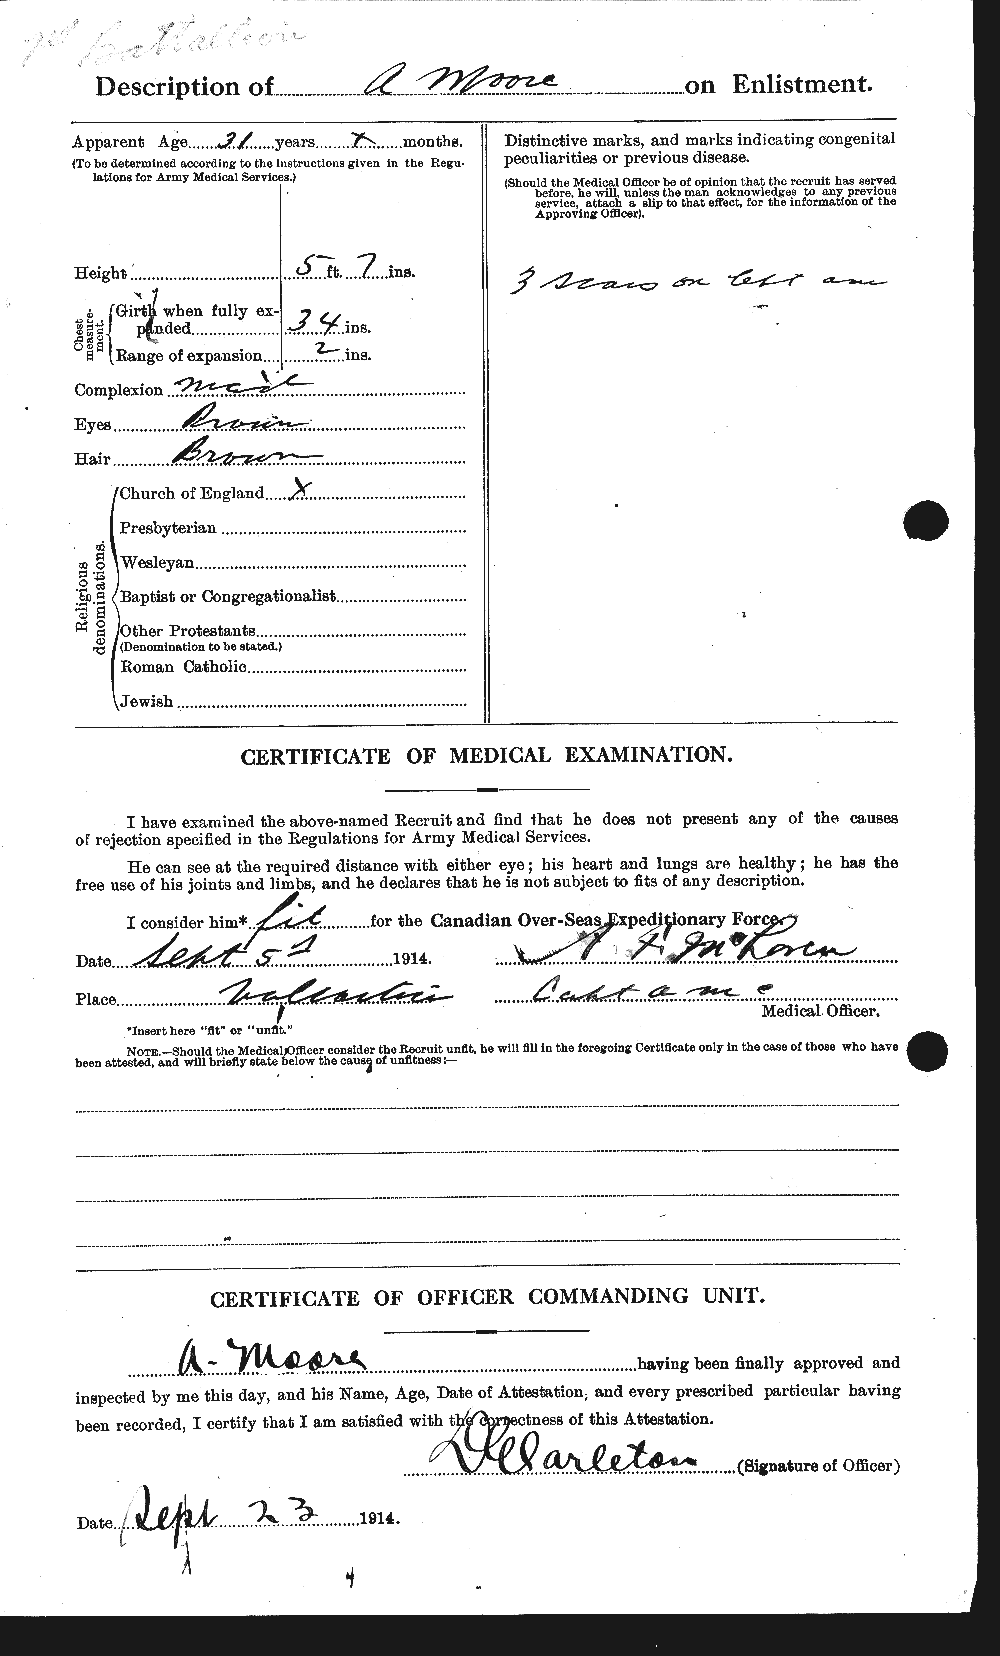 Personnel Records of the First World War - CEF 506383b